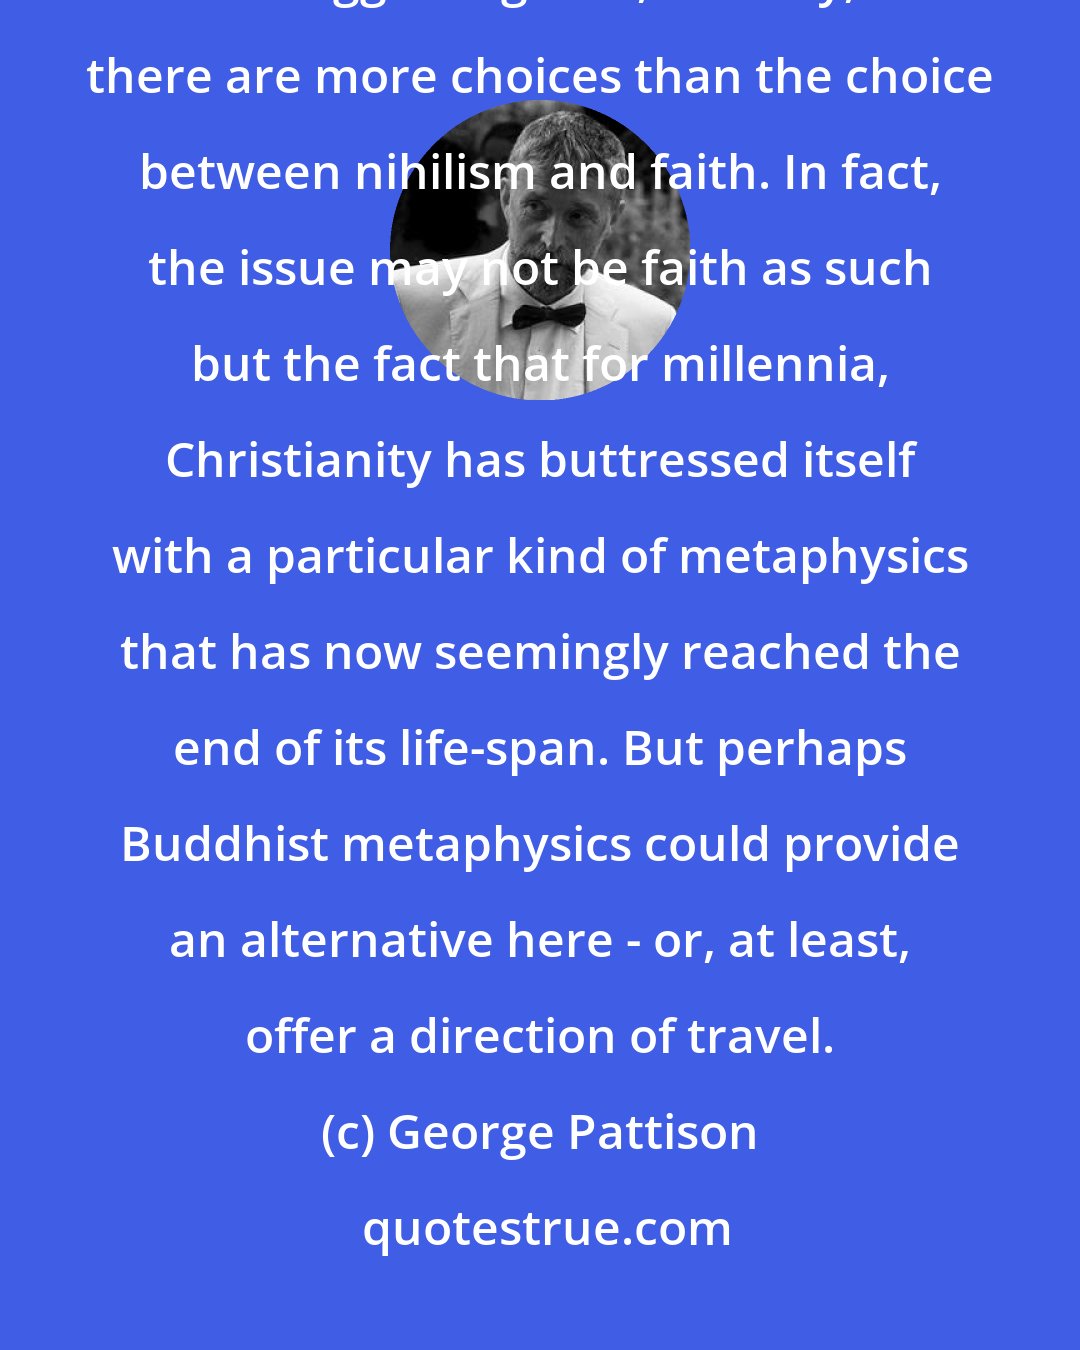 George Pattison: I'm not sure if Cupitt himself still uses this term, but it's useful in suggesting that, actually, there are more choices than the choice between nihilism and faith. In fact, the issue may not be faith as such but the fact that for millennia, Christianity has buttressed itself with a particular kind of metaphysics that has now seemingly reached the end of its life-span. But perhaps Buddhist metaphysics could provide an alternative here - or, at least, offer a direction of travel.